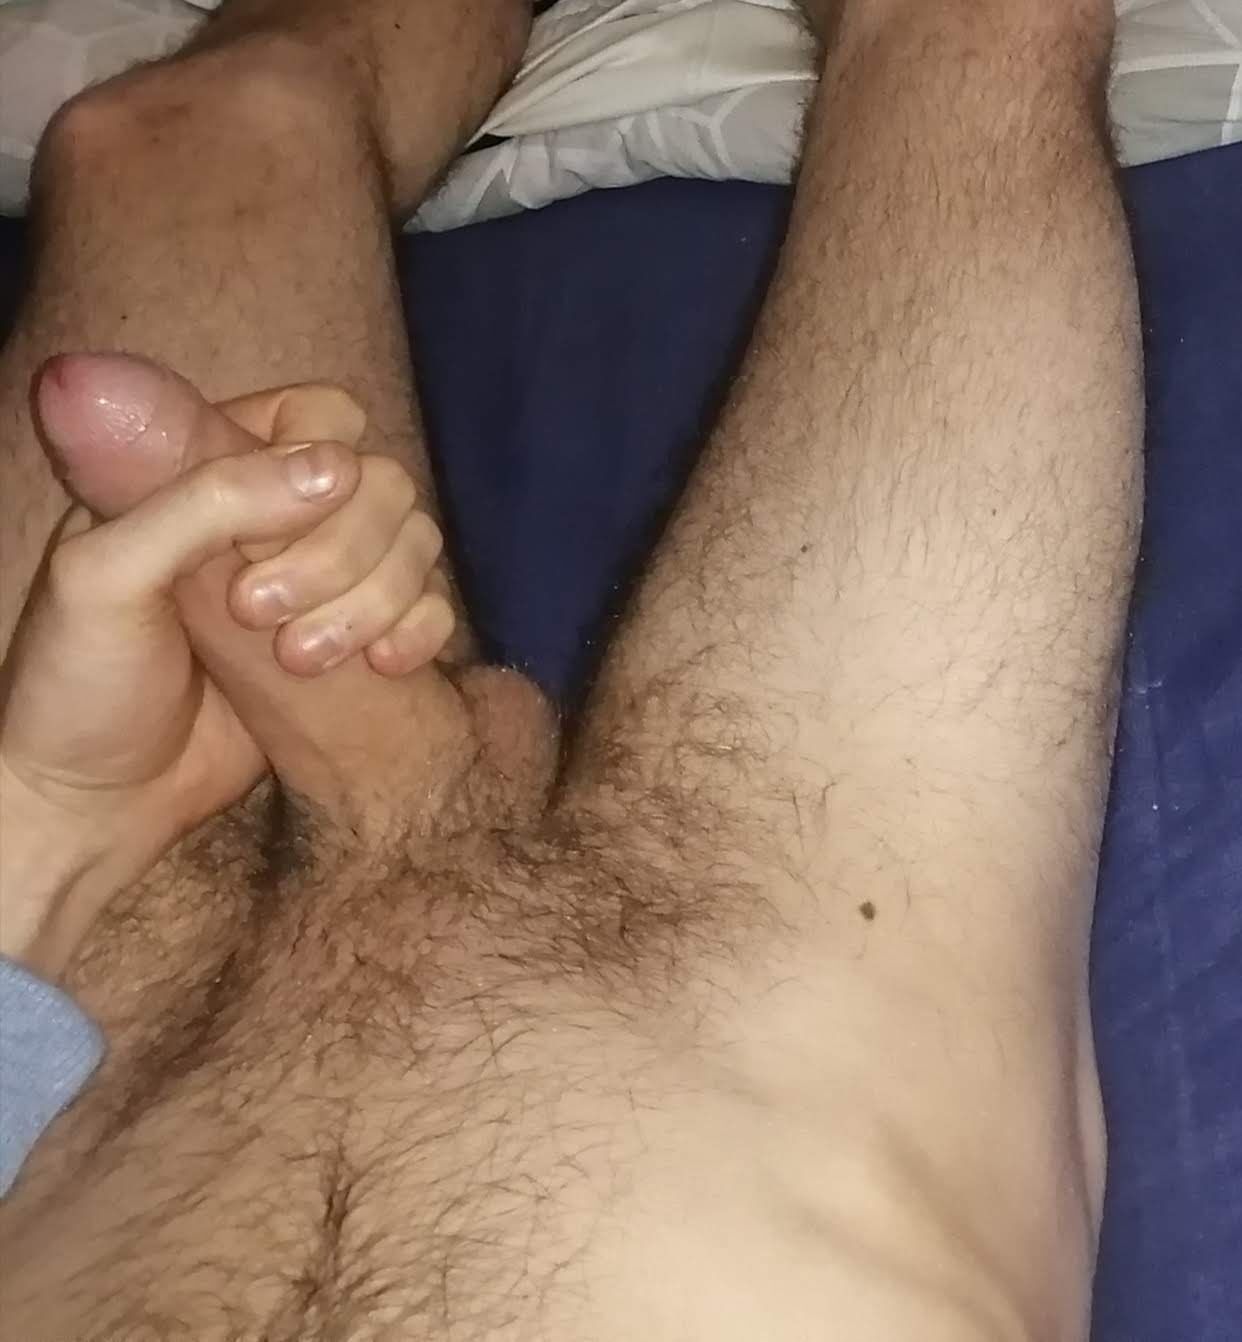 Me and my dick #10